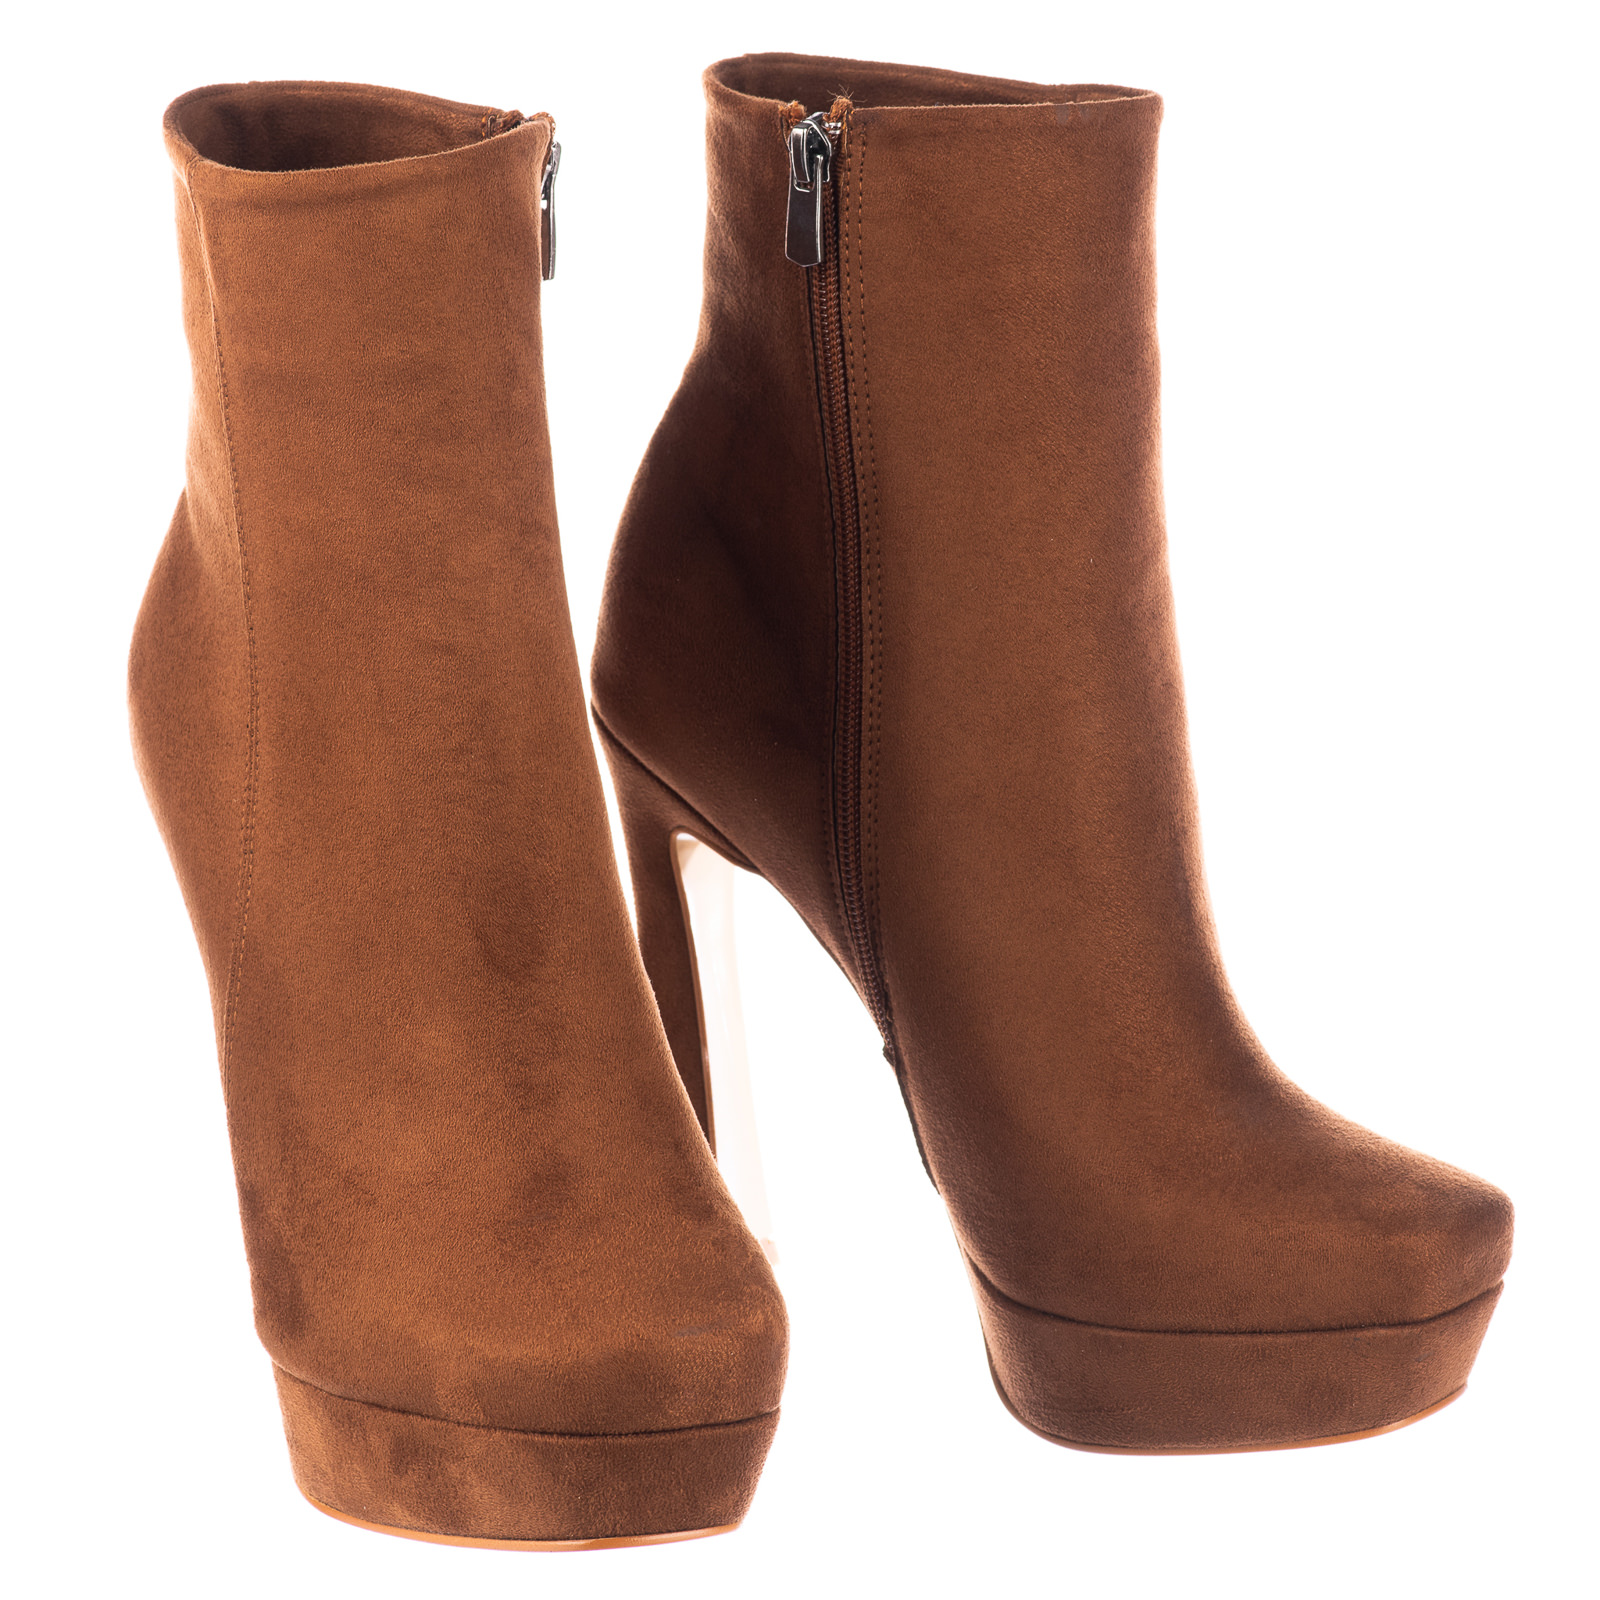 Women ankle boots B656 - CAMEL